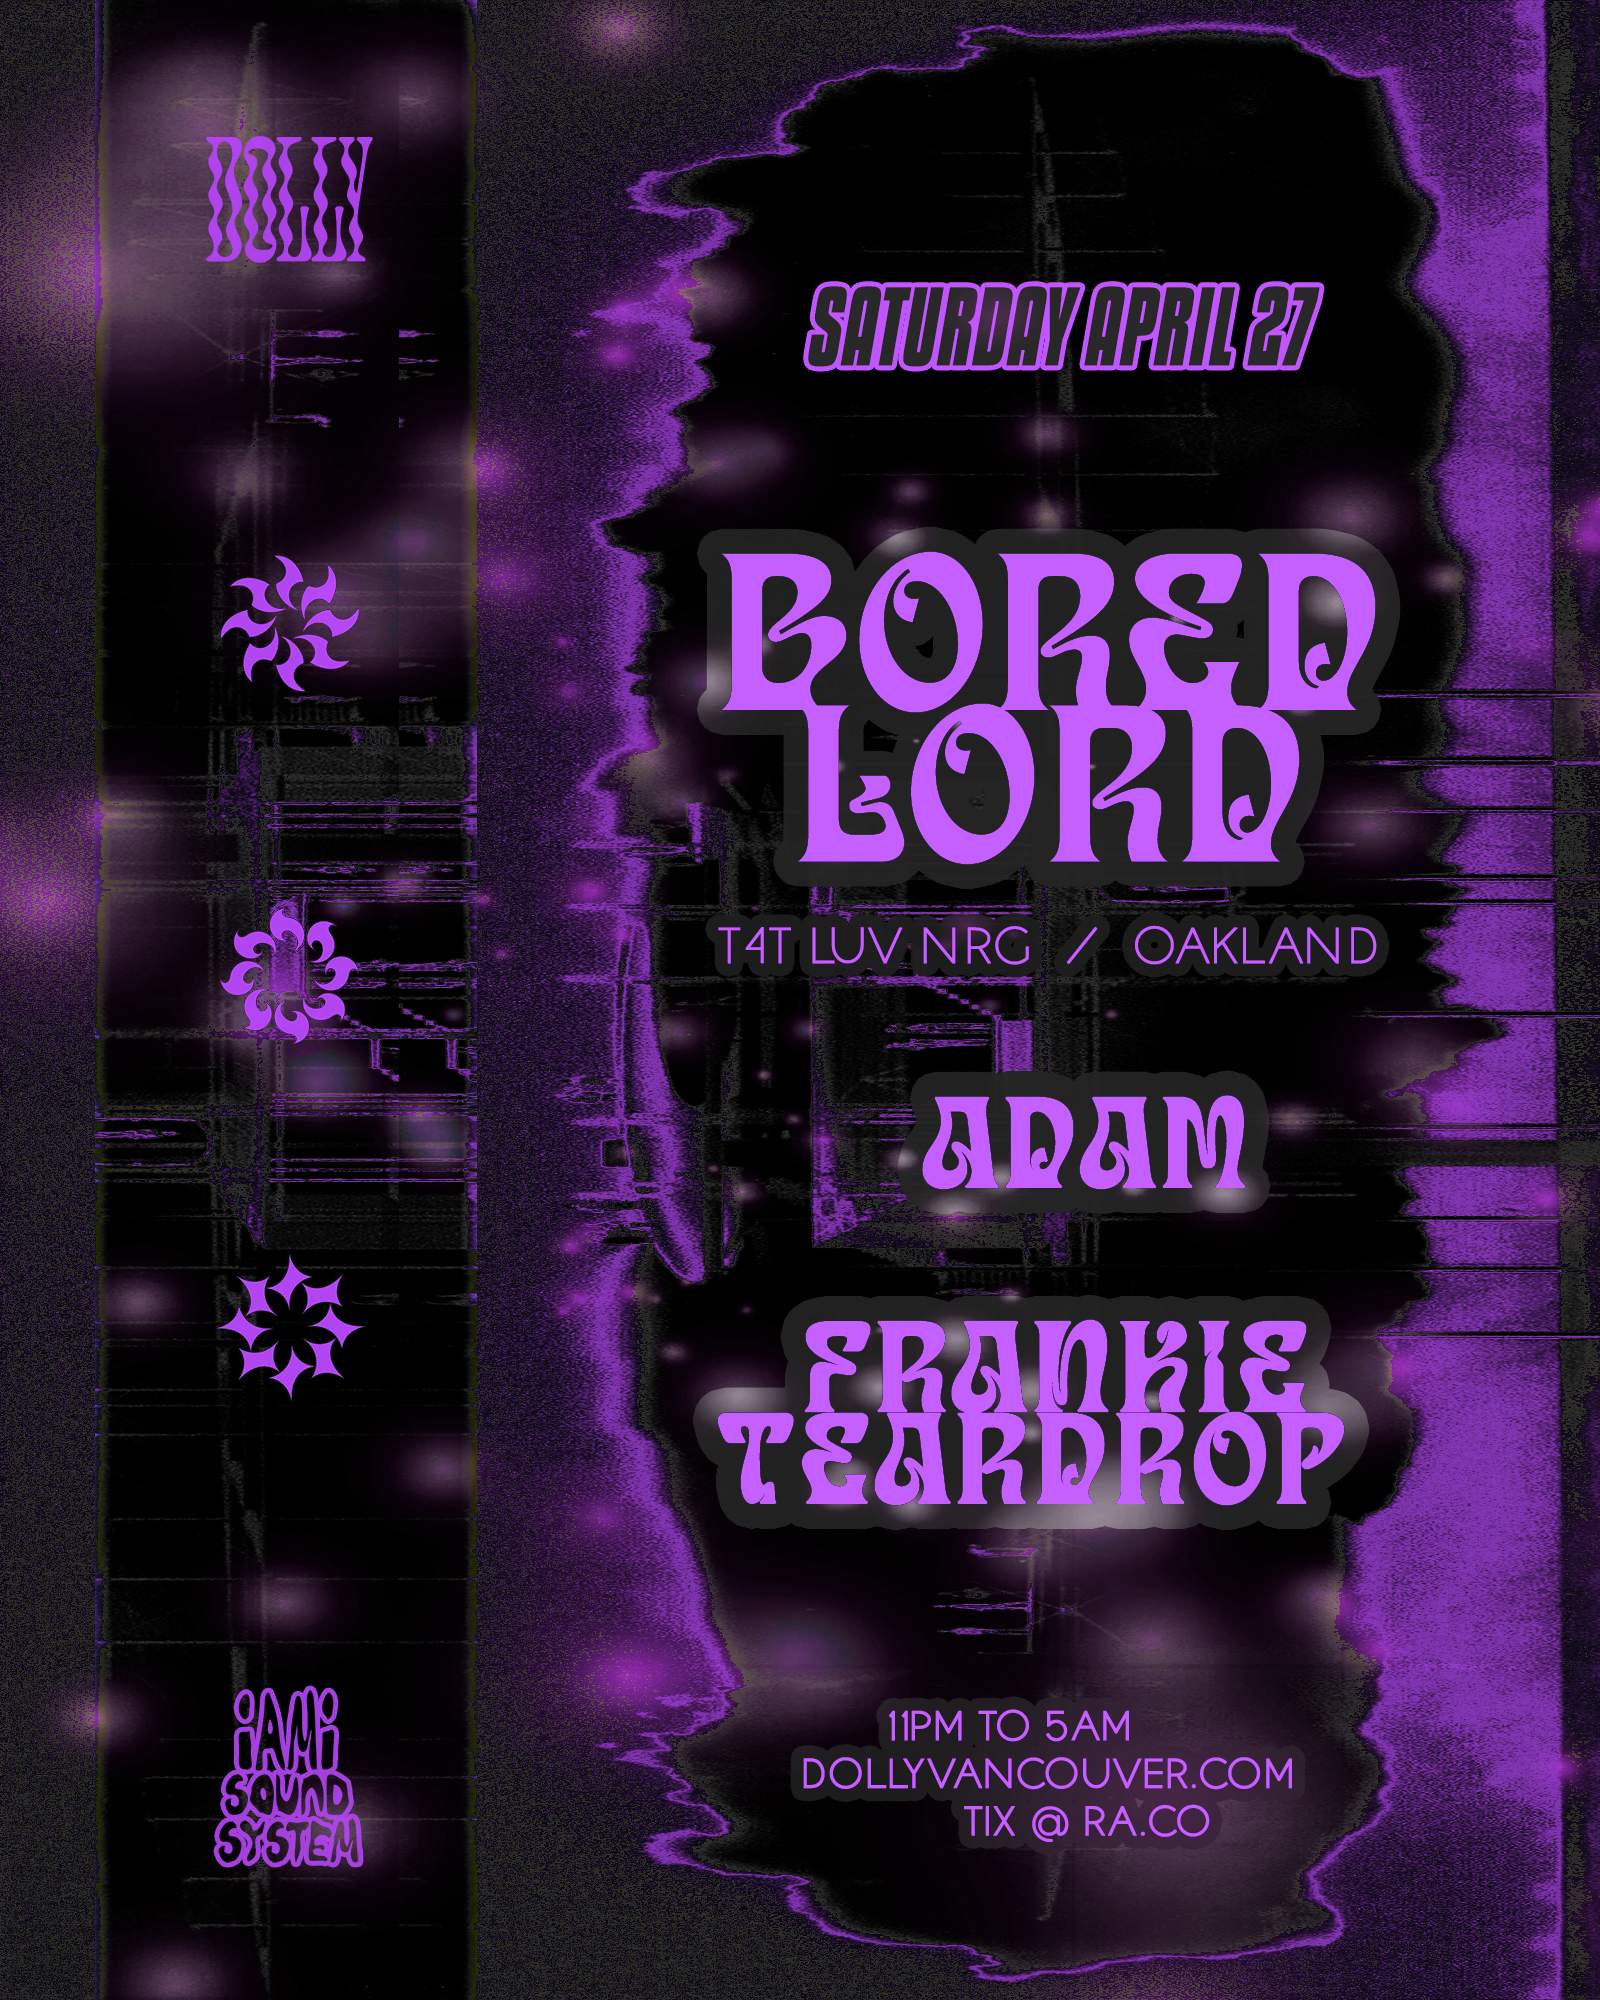 DOLLY presents: Bored Lord (T4T LUV NRG) + Adam & Frankie Teardrop - フライヤー表